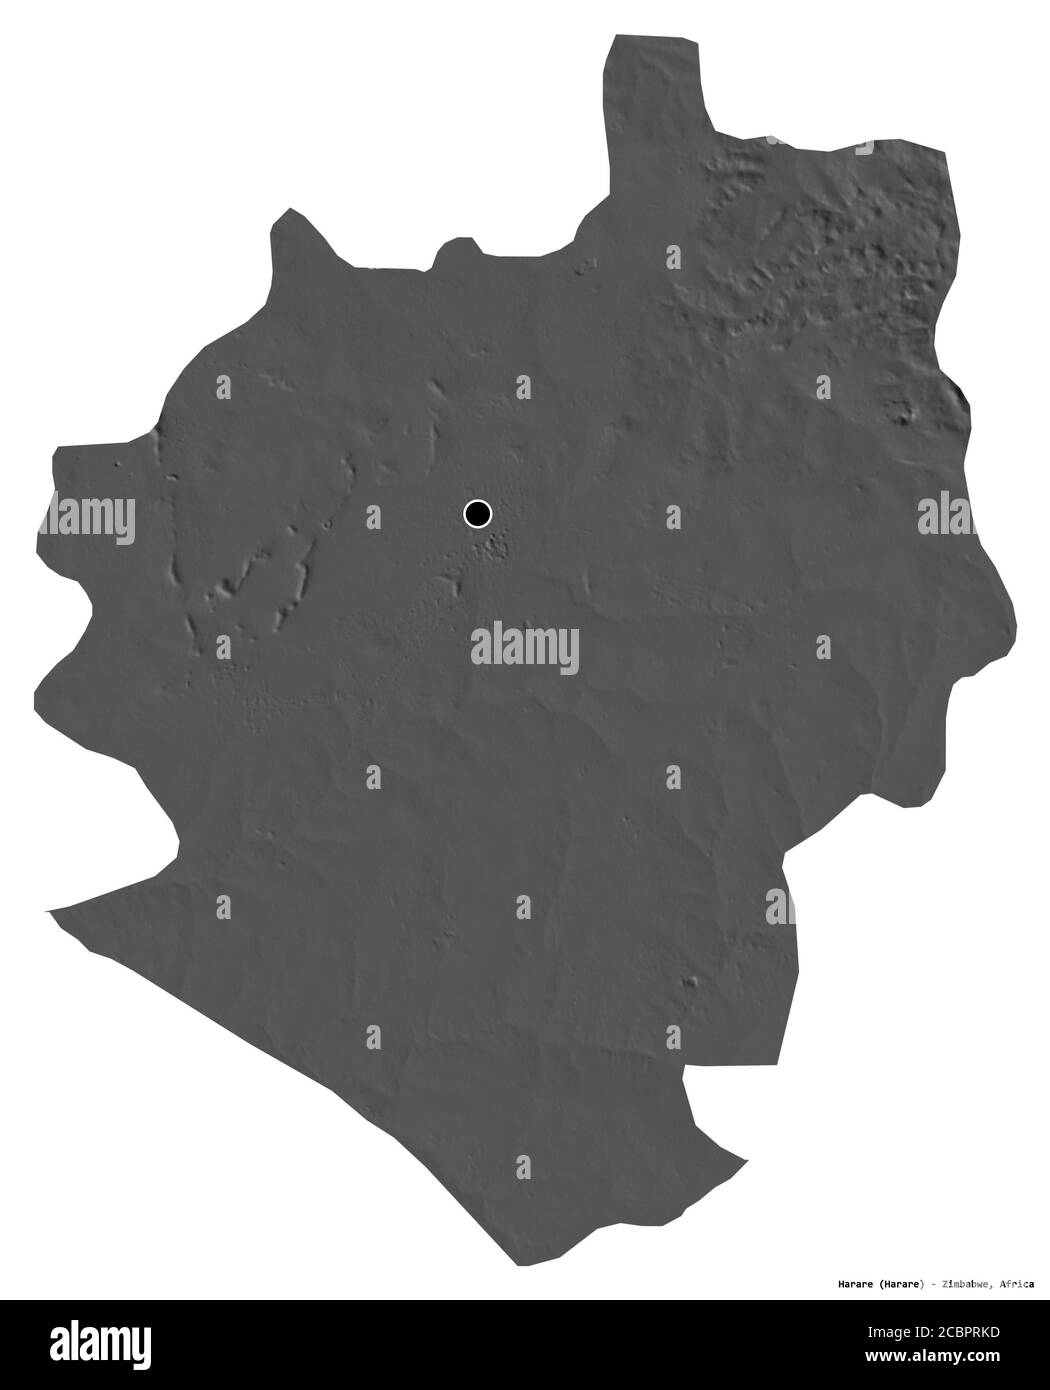 Shape of Harare, city of Zimbabwe, with its capital isolated on white background. Bilevel elevation map. 3D rendering Stock Photo